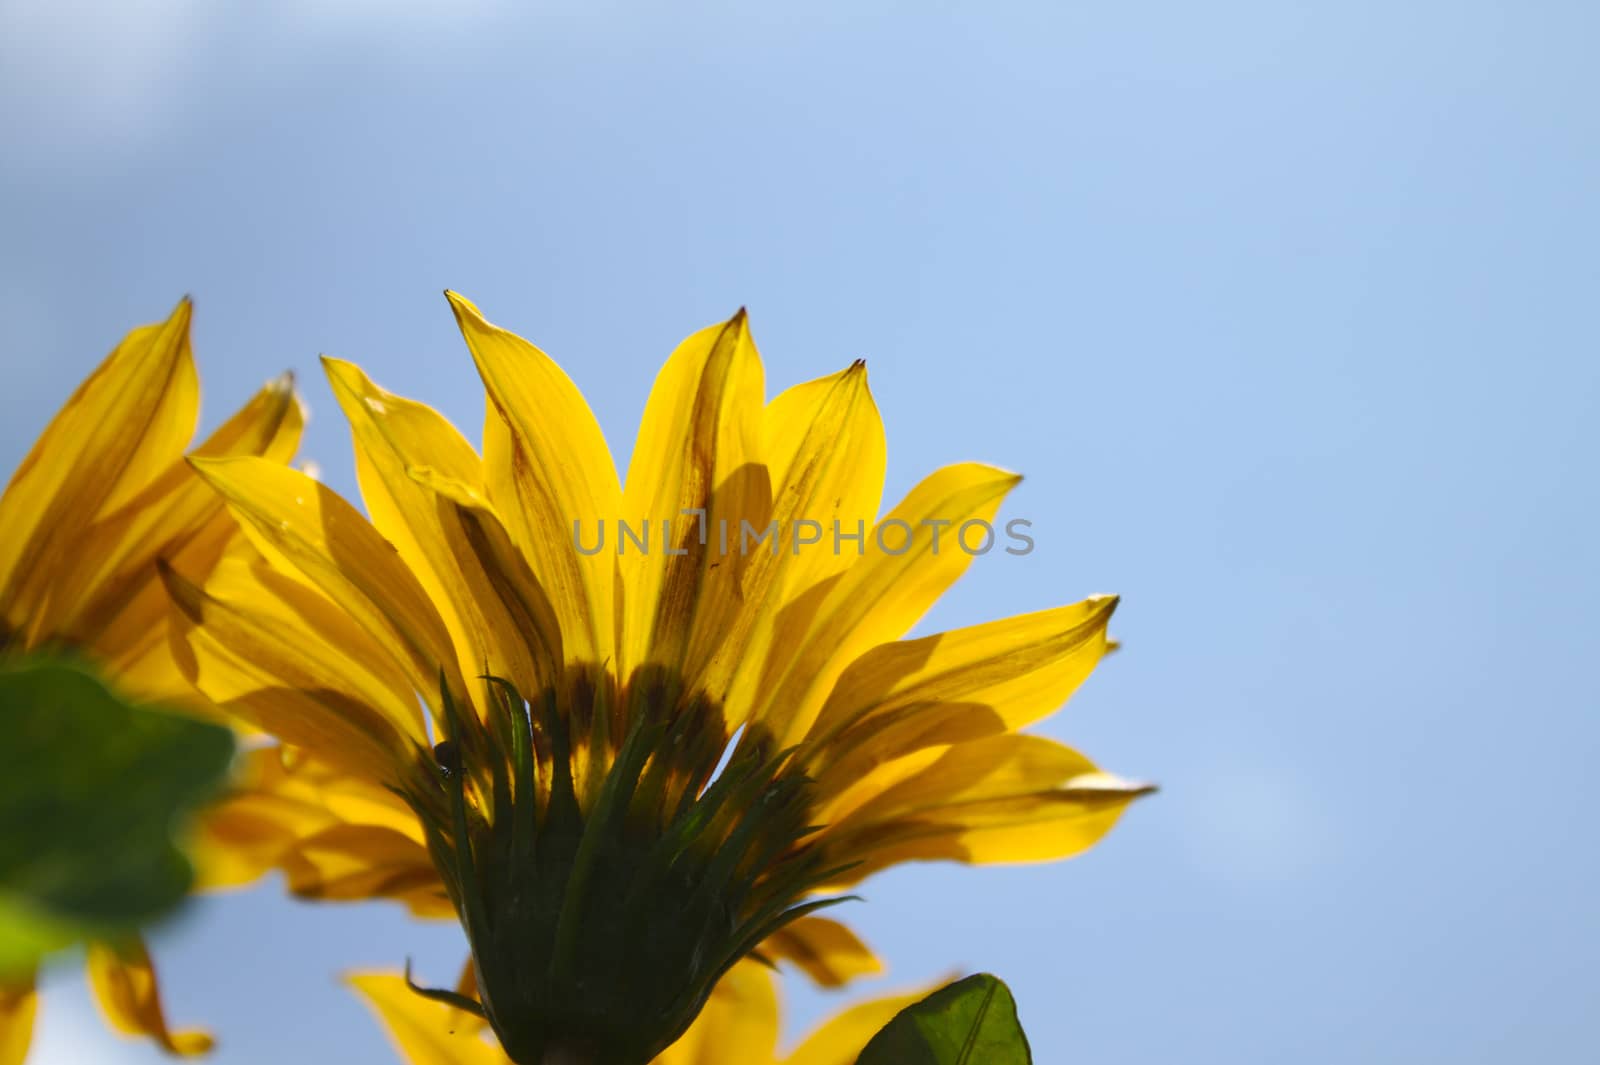 sunflower in front of the blue sky by martina_unbehauen